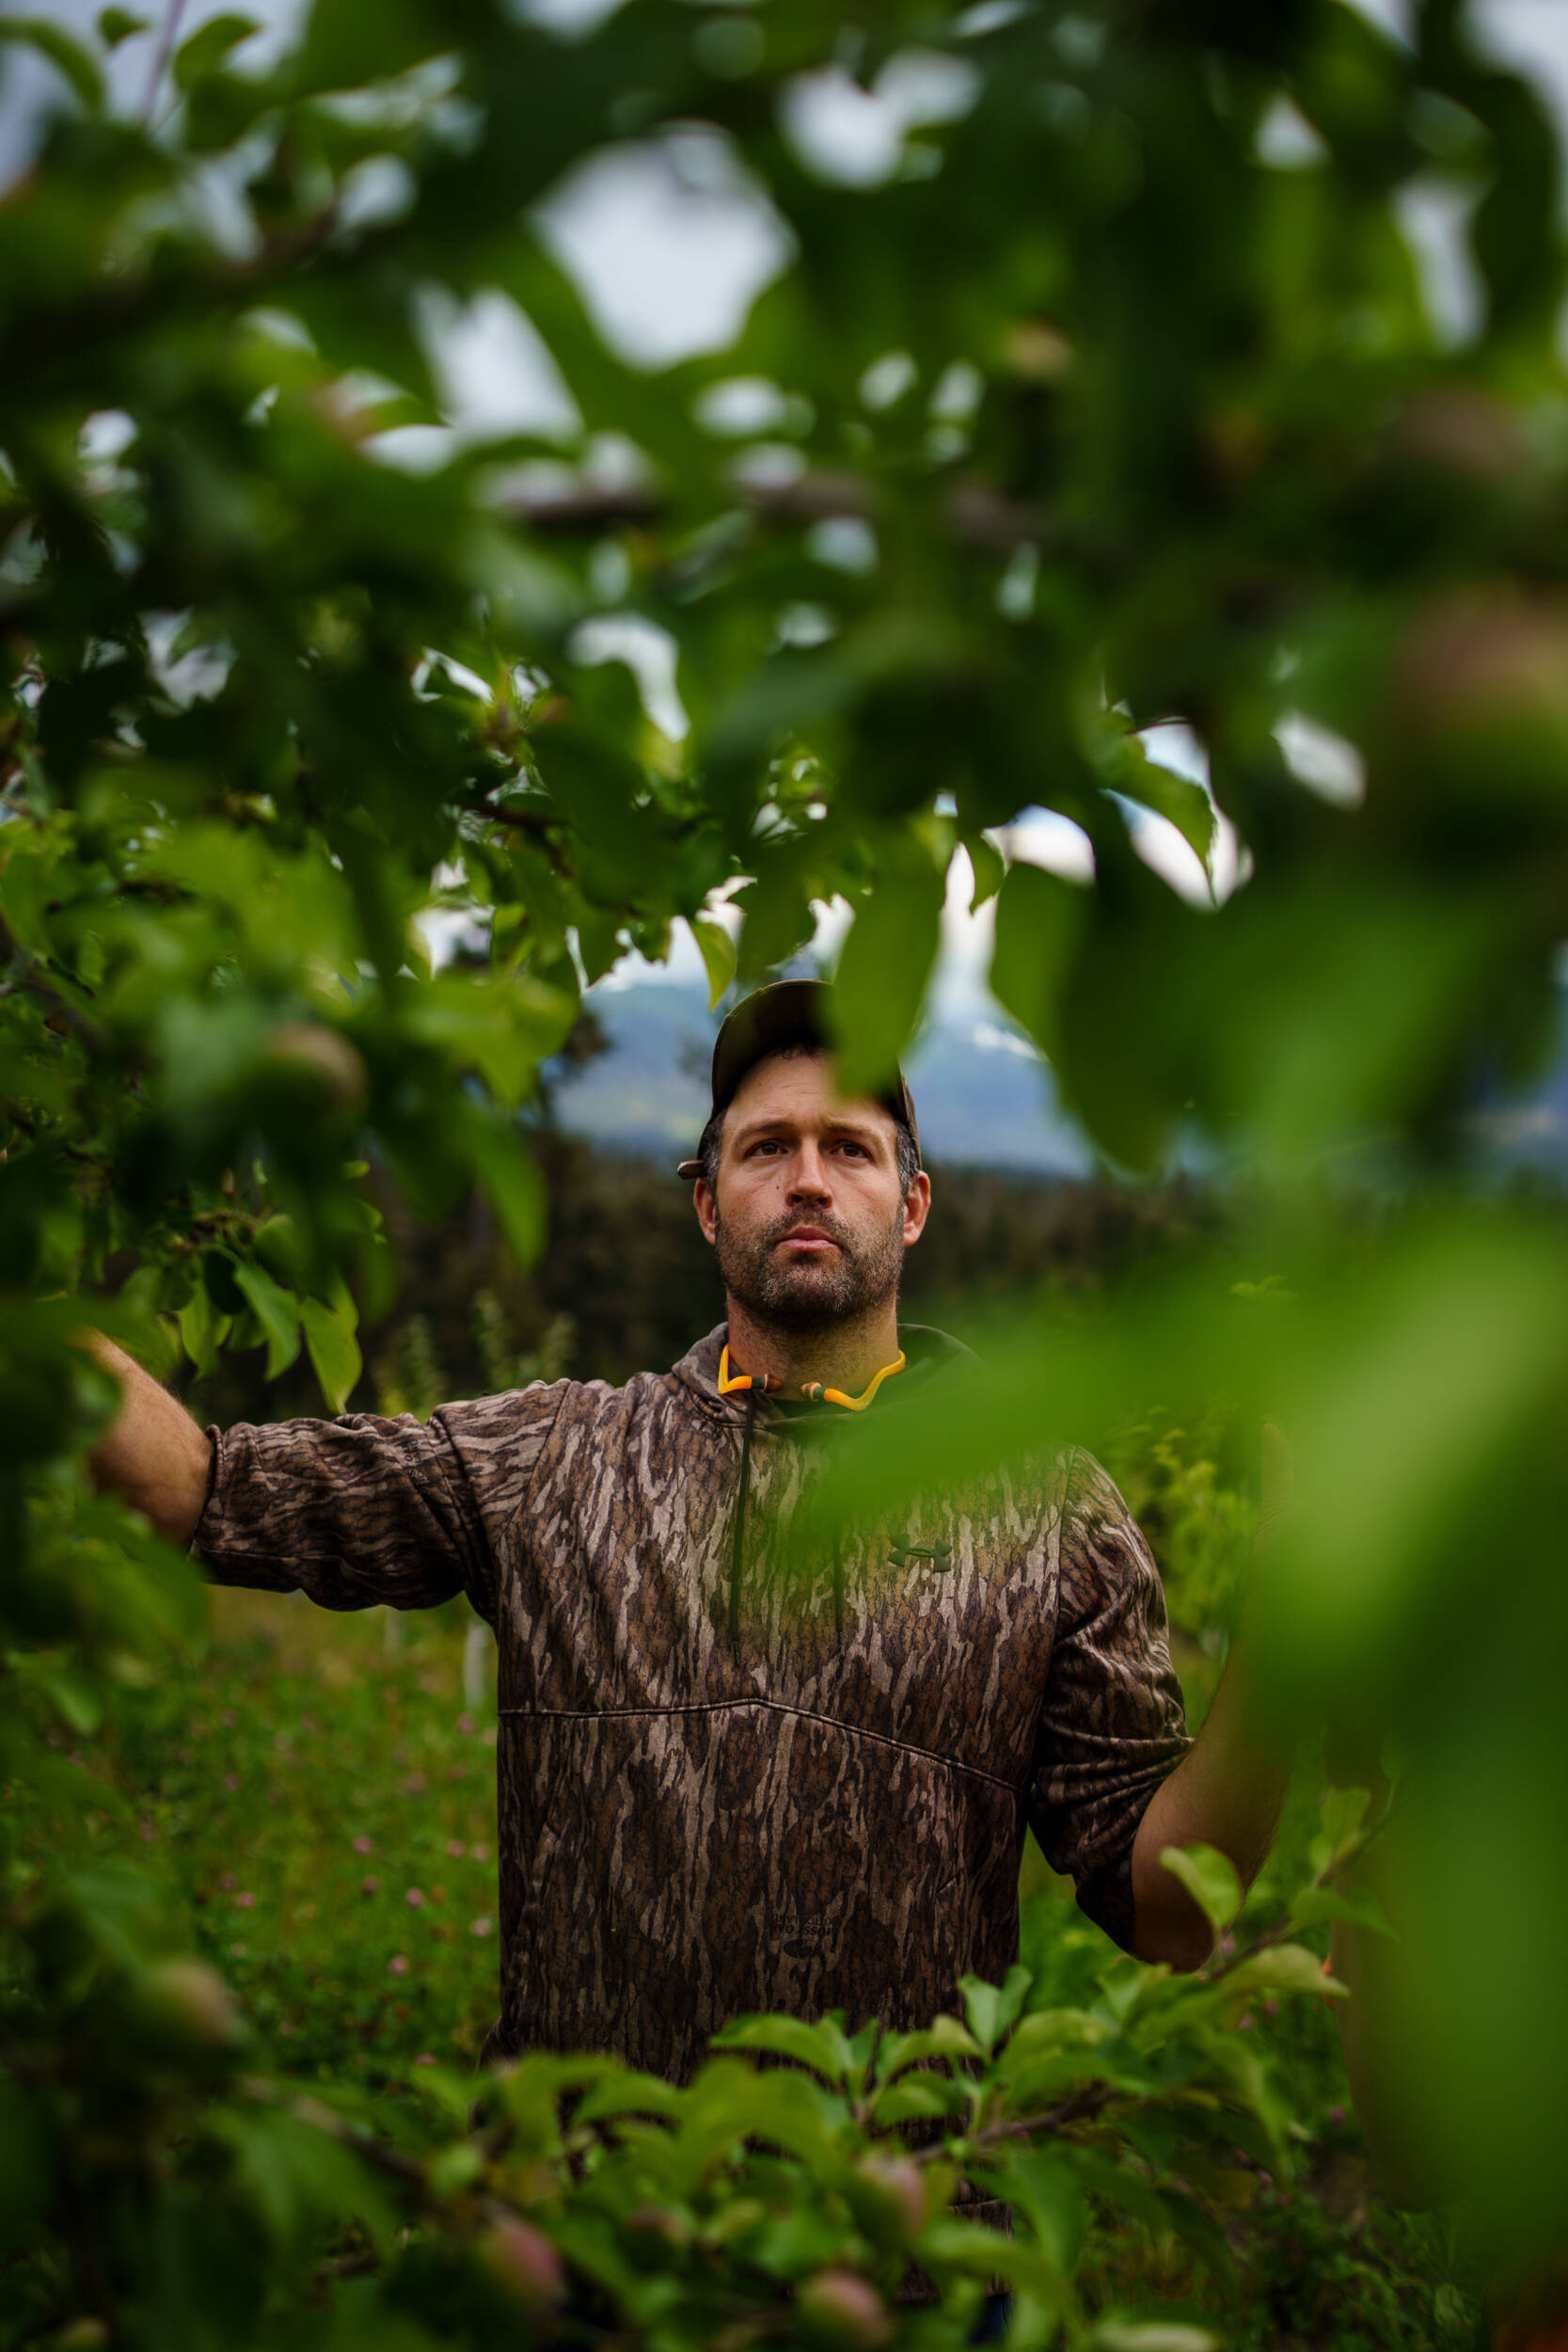 Robert Bishop of Alaska Apple Farms in Hoonah, shows off one of his regionally developed apple trees. Bishop, who has presented at each Farmers Summit, is generous in sharing his expertise on fruit cultivation unique to Southeast Alaska. (Courtesy Photo / Bethany Goodrich)